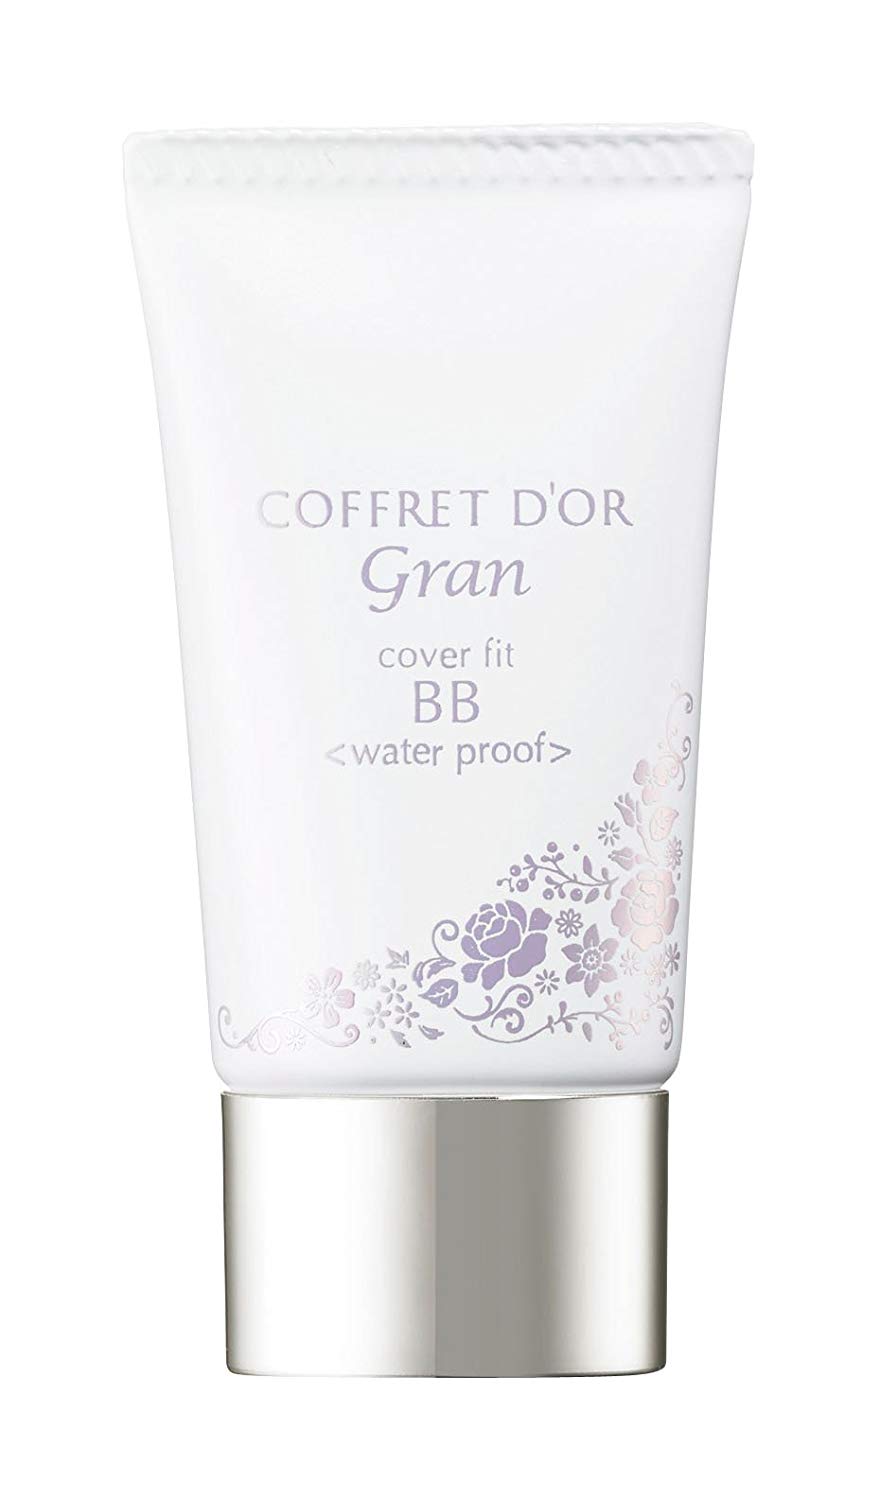 Kanebo Coffret d'or Gran BB Cover Fit